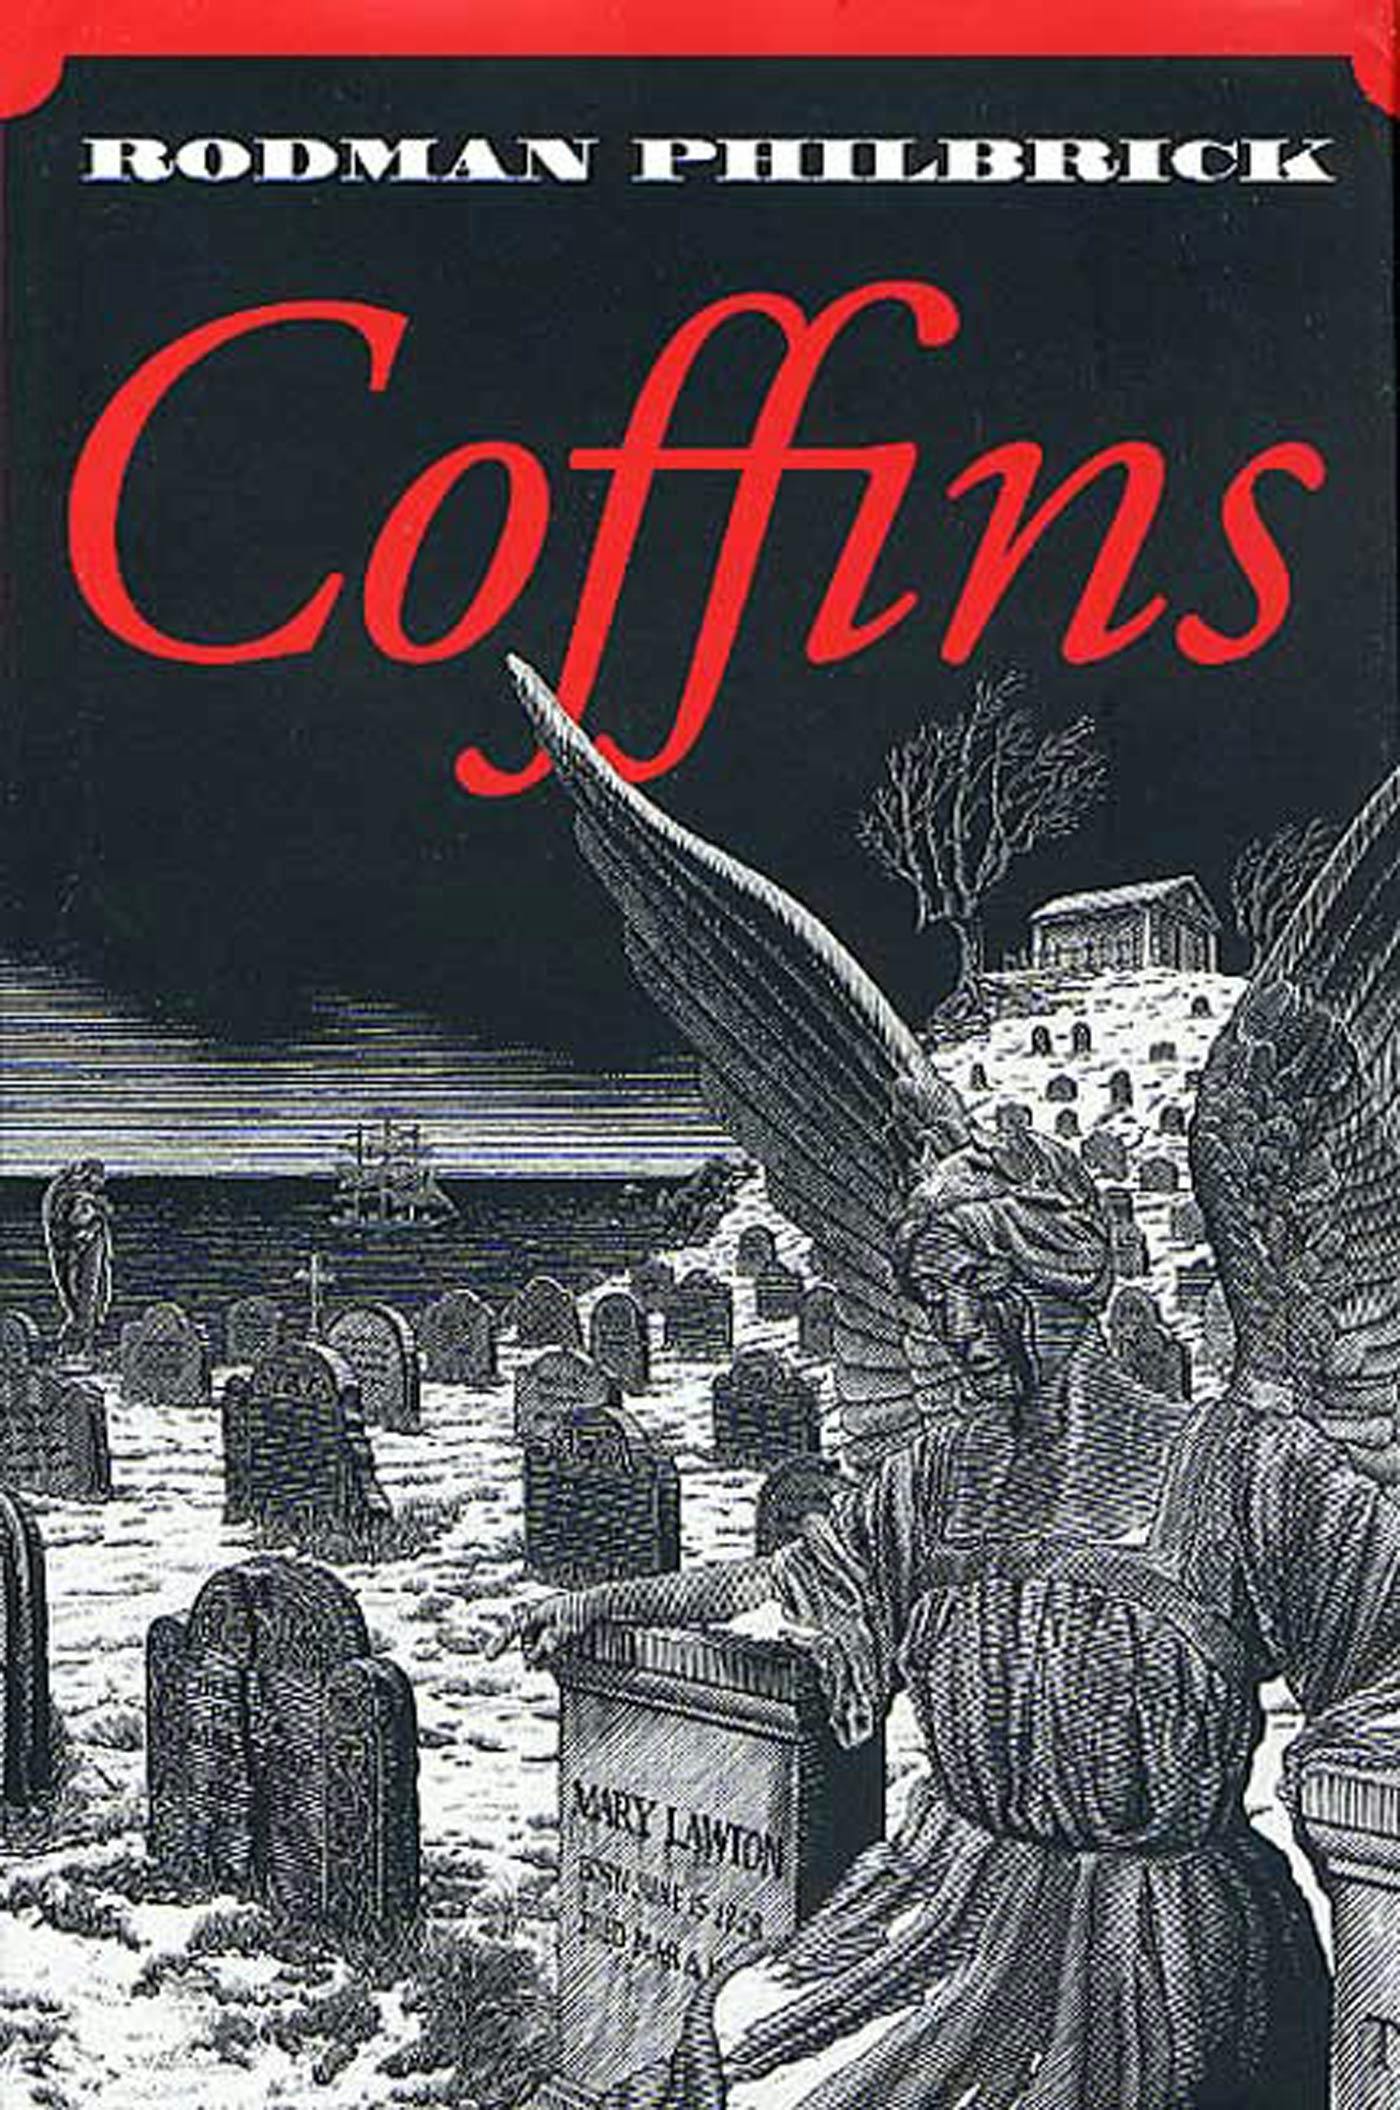 Cover for the book titled as: Coffins